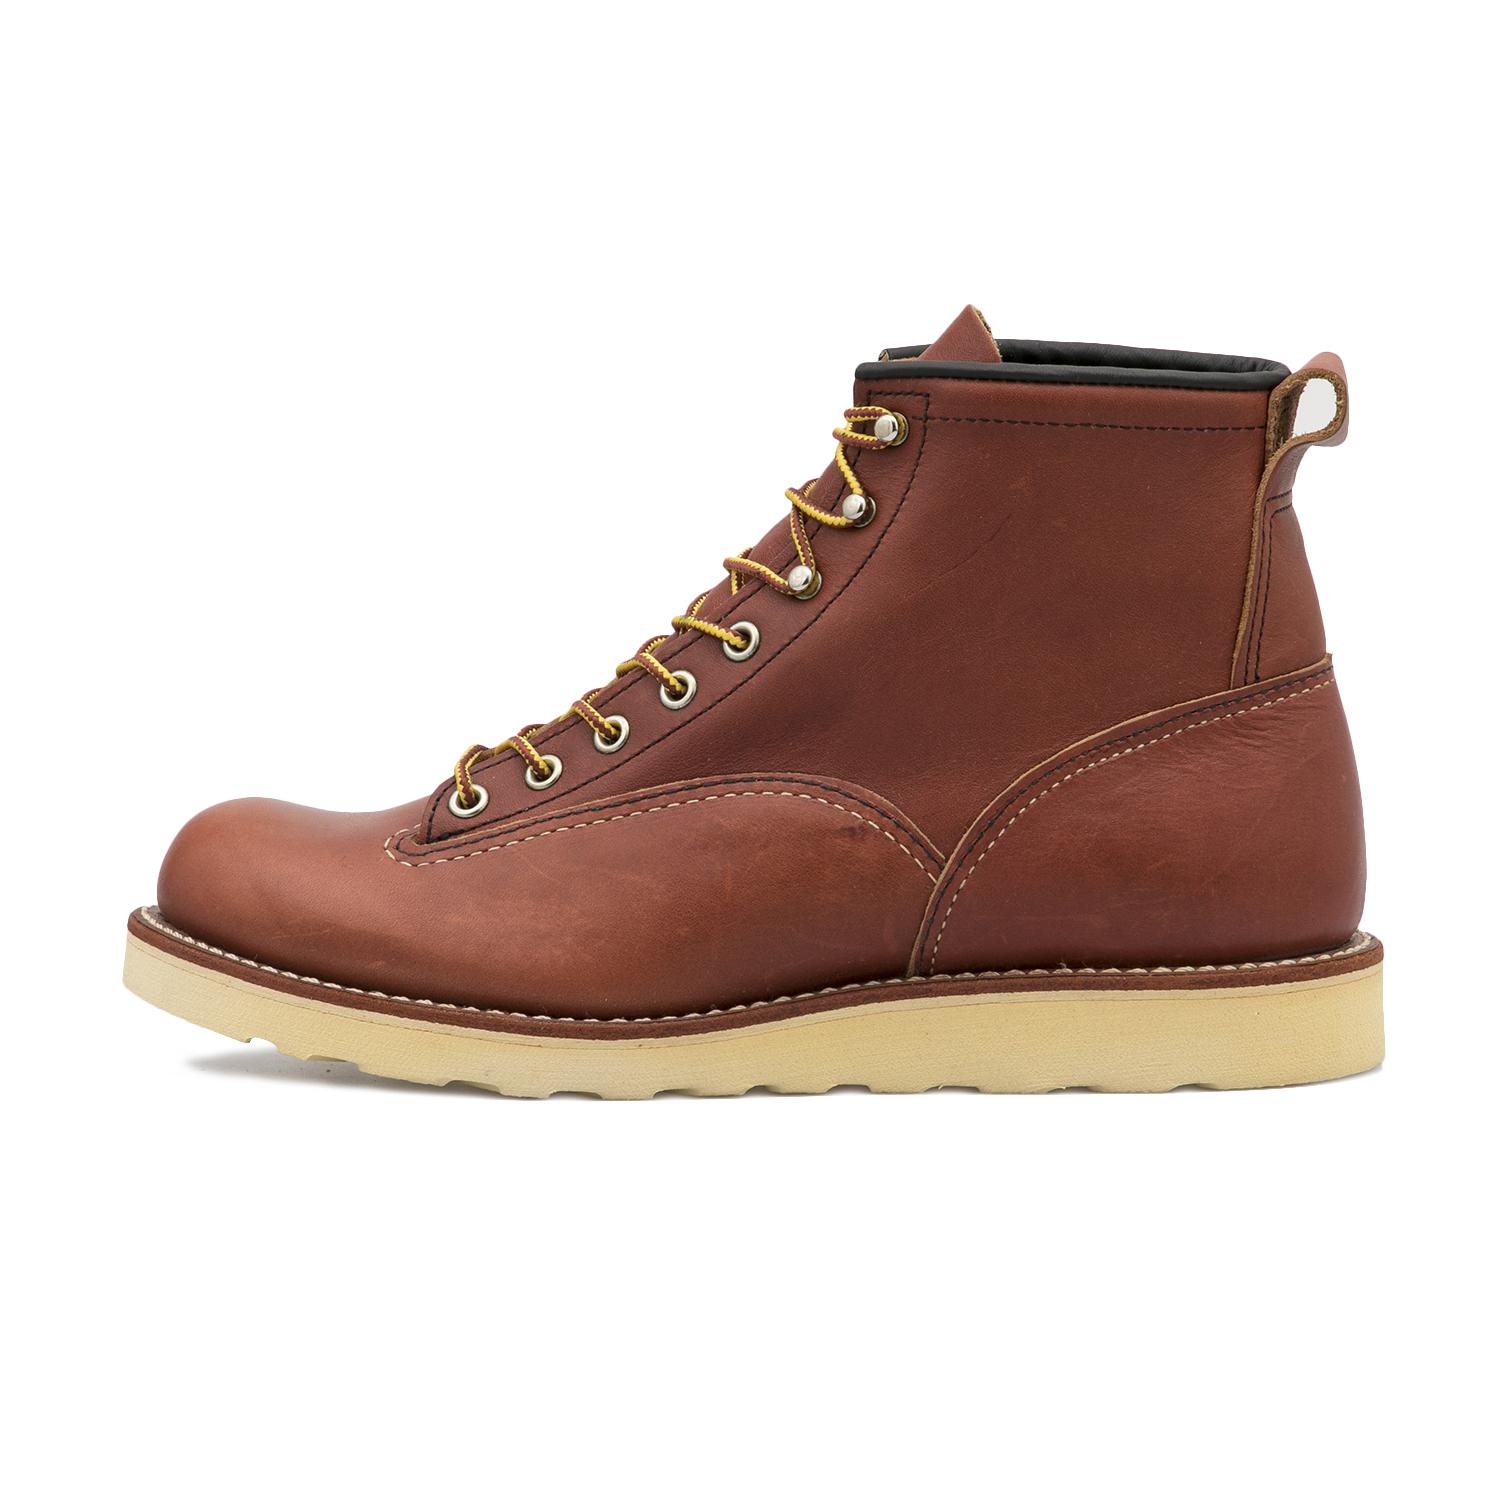 【RED WING】 6'LINEMAN BOOTS 6インチ ラインマンブーツ 2924 ABC限定RED BROWN